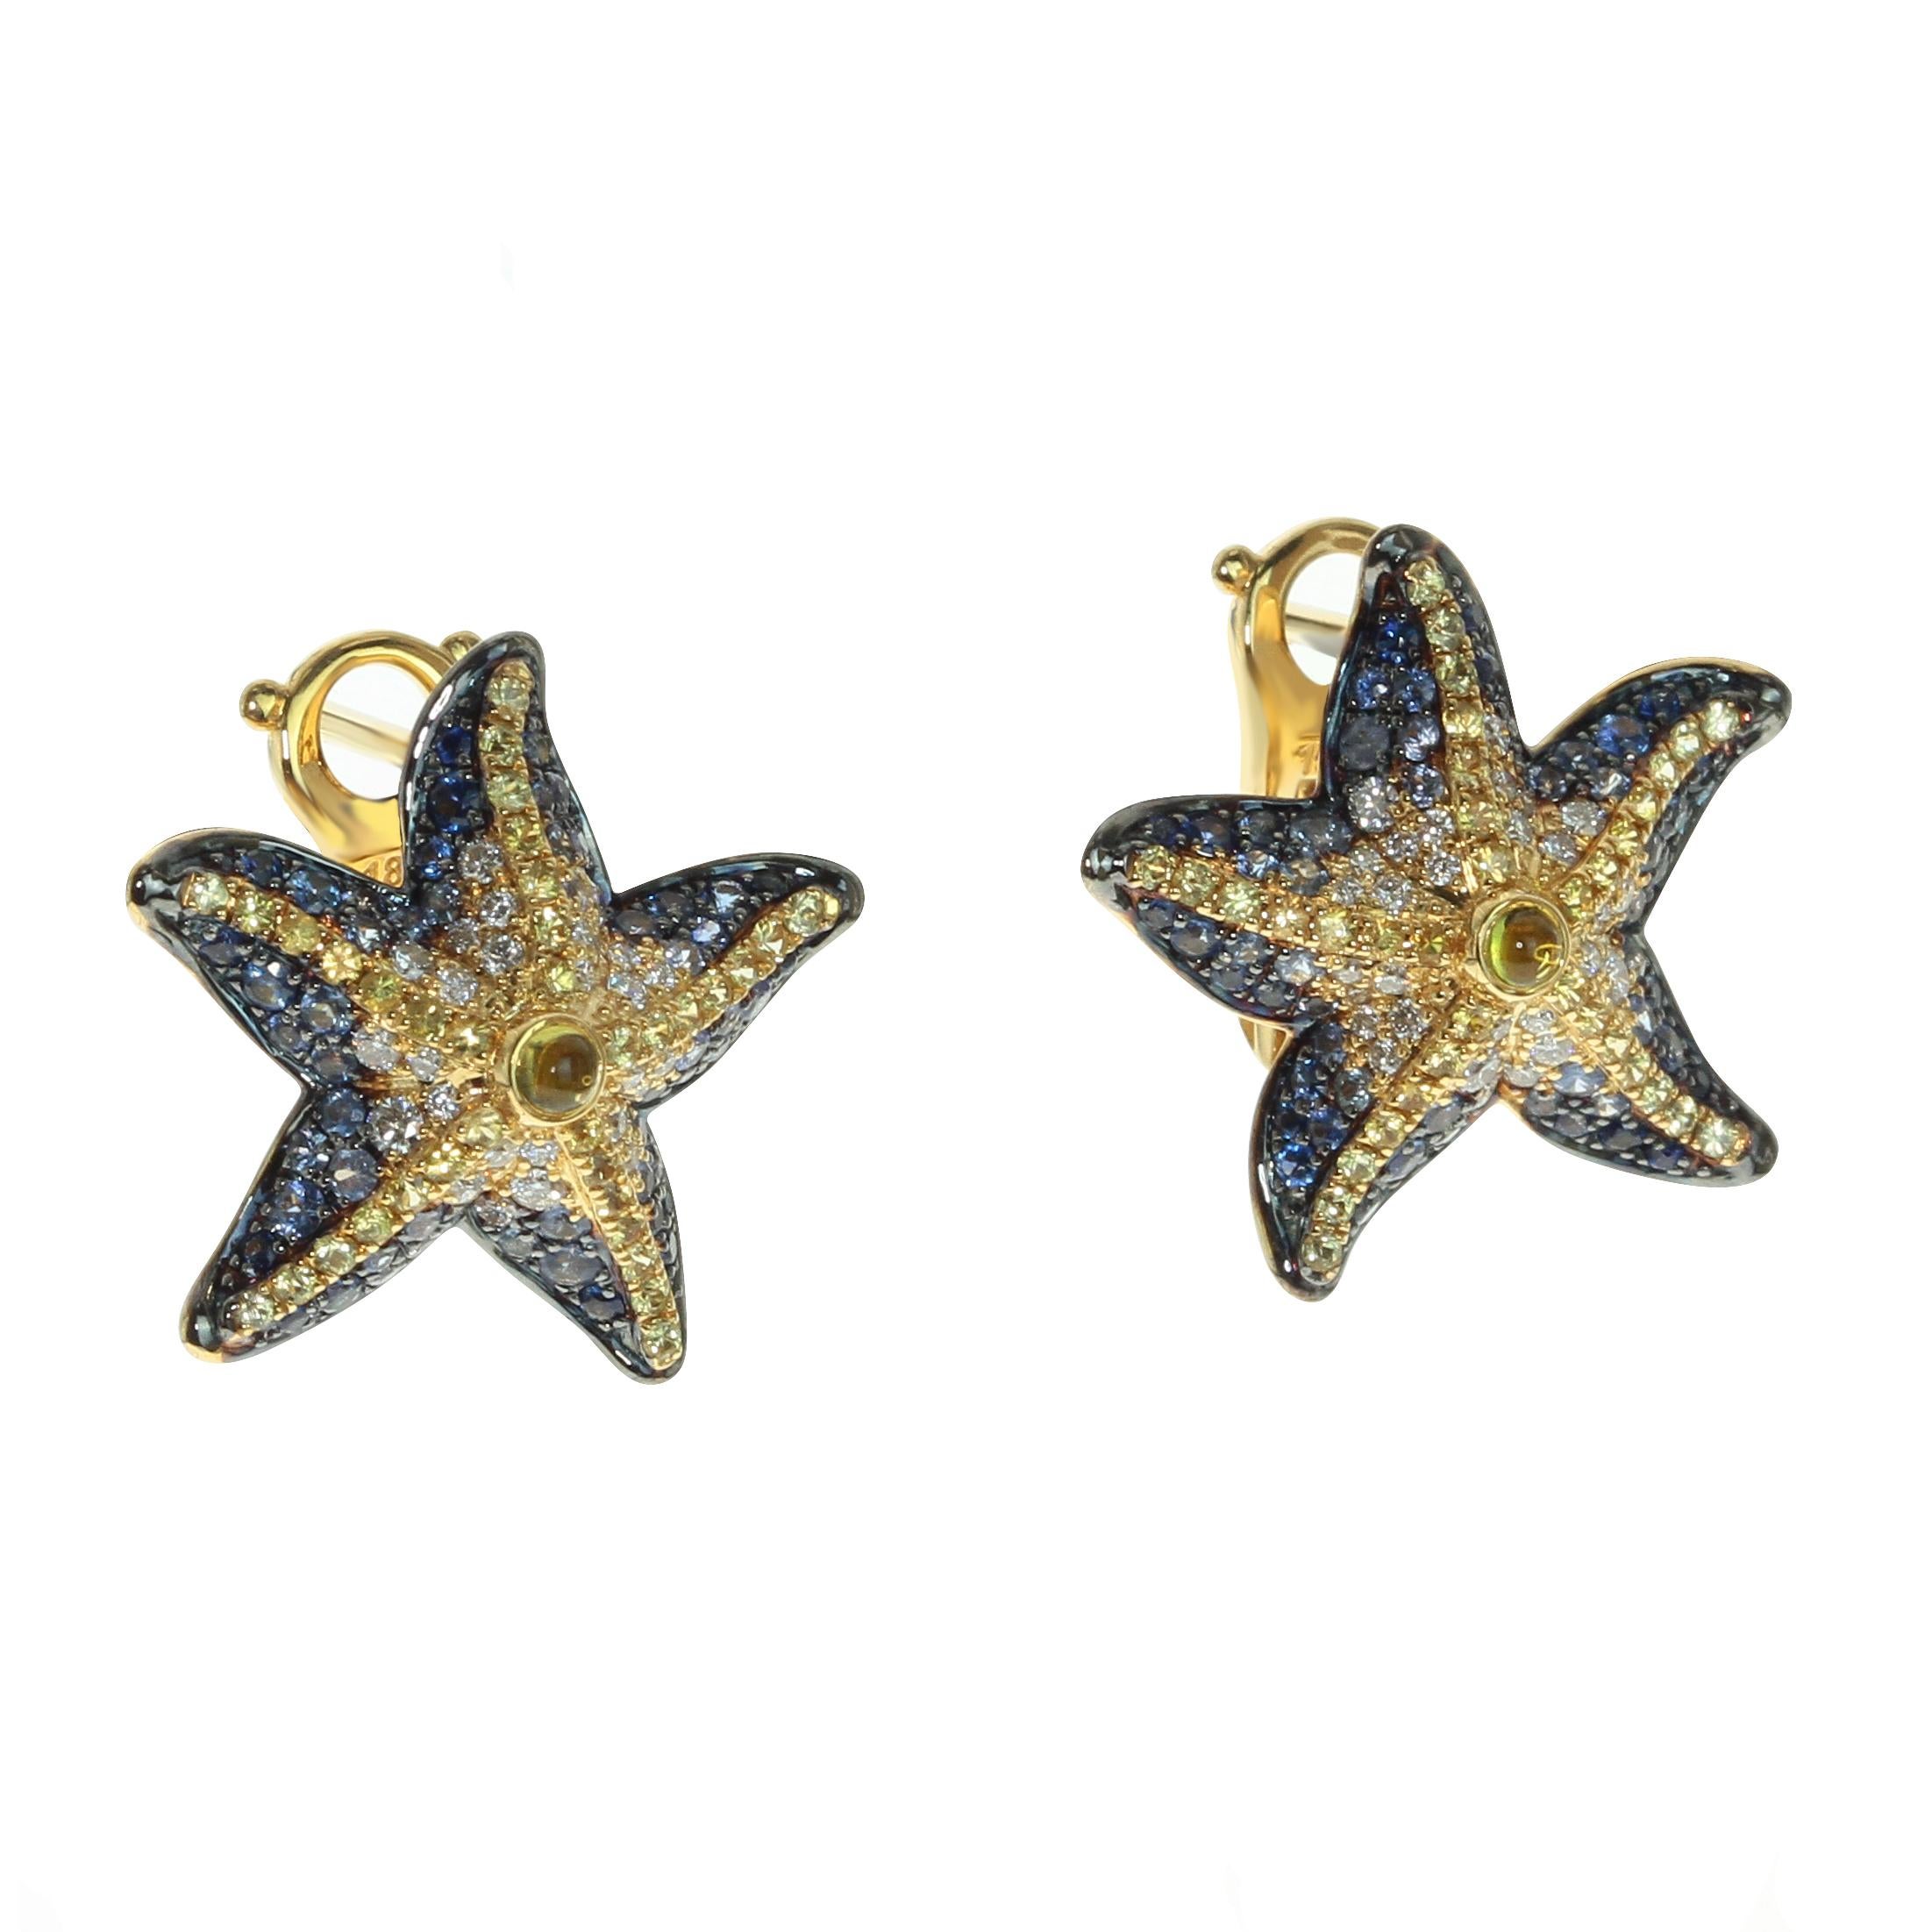 Diamonds Sapphire 18 Karat Yellow Gold Sea Star Earrings

Dream on Sunny Sea Holidays? With this Sea Star Earrings all the colours of the reef will be always with you. Check the graduation of the colours, and how the shape of the Sea Star fit the